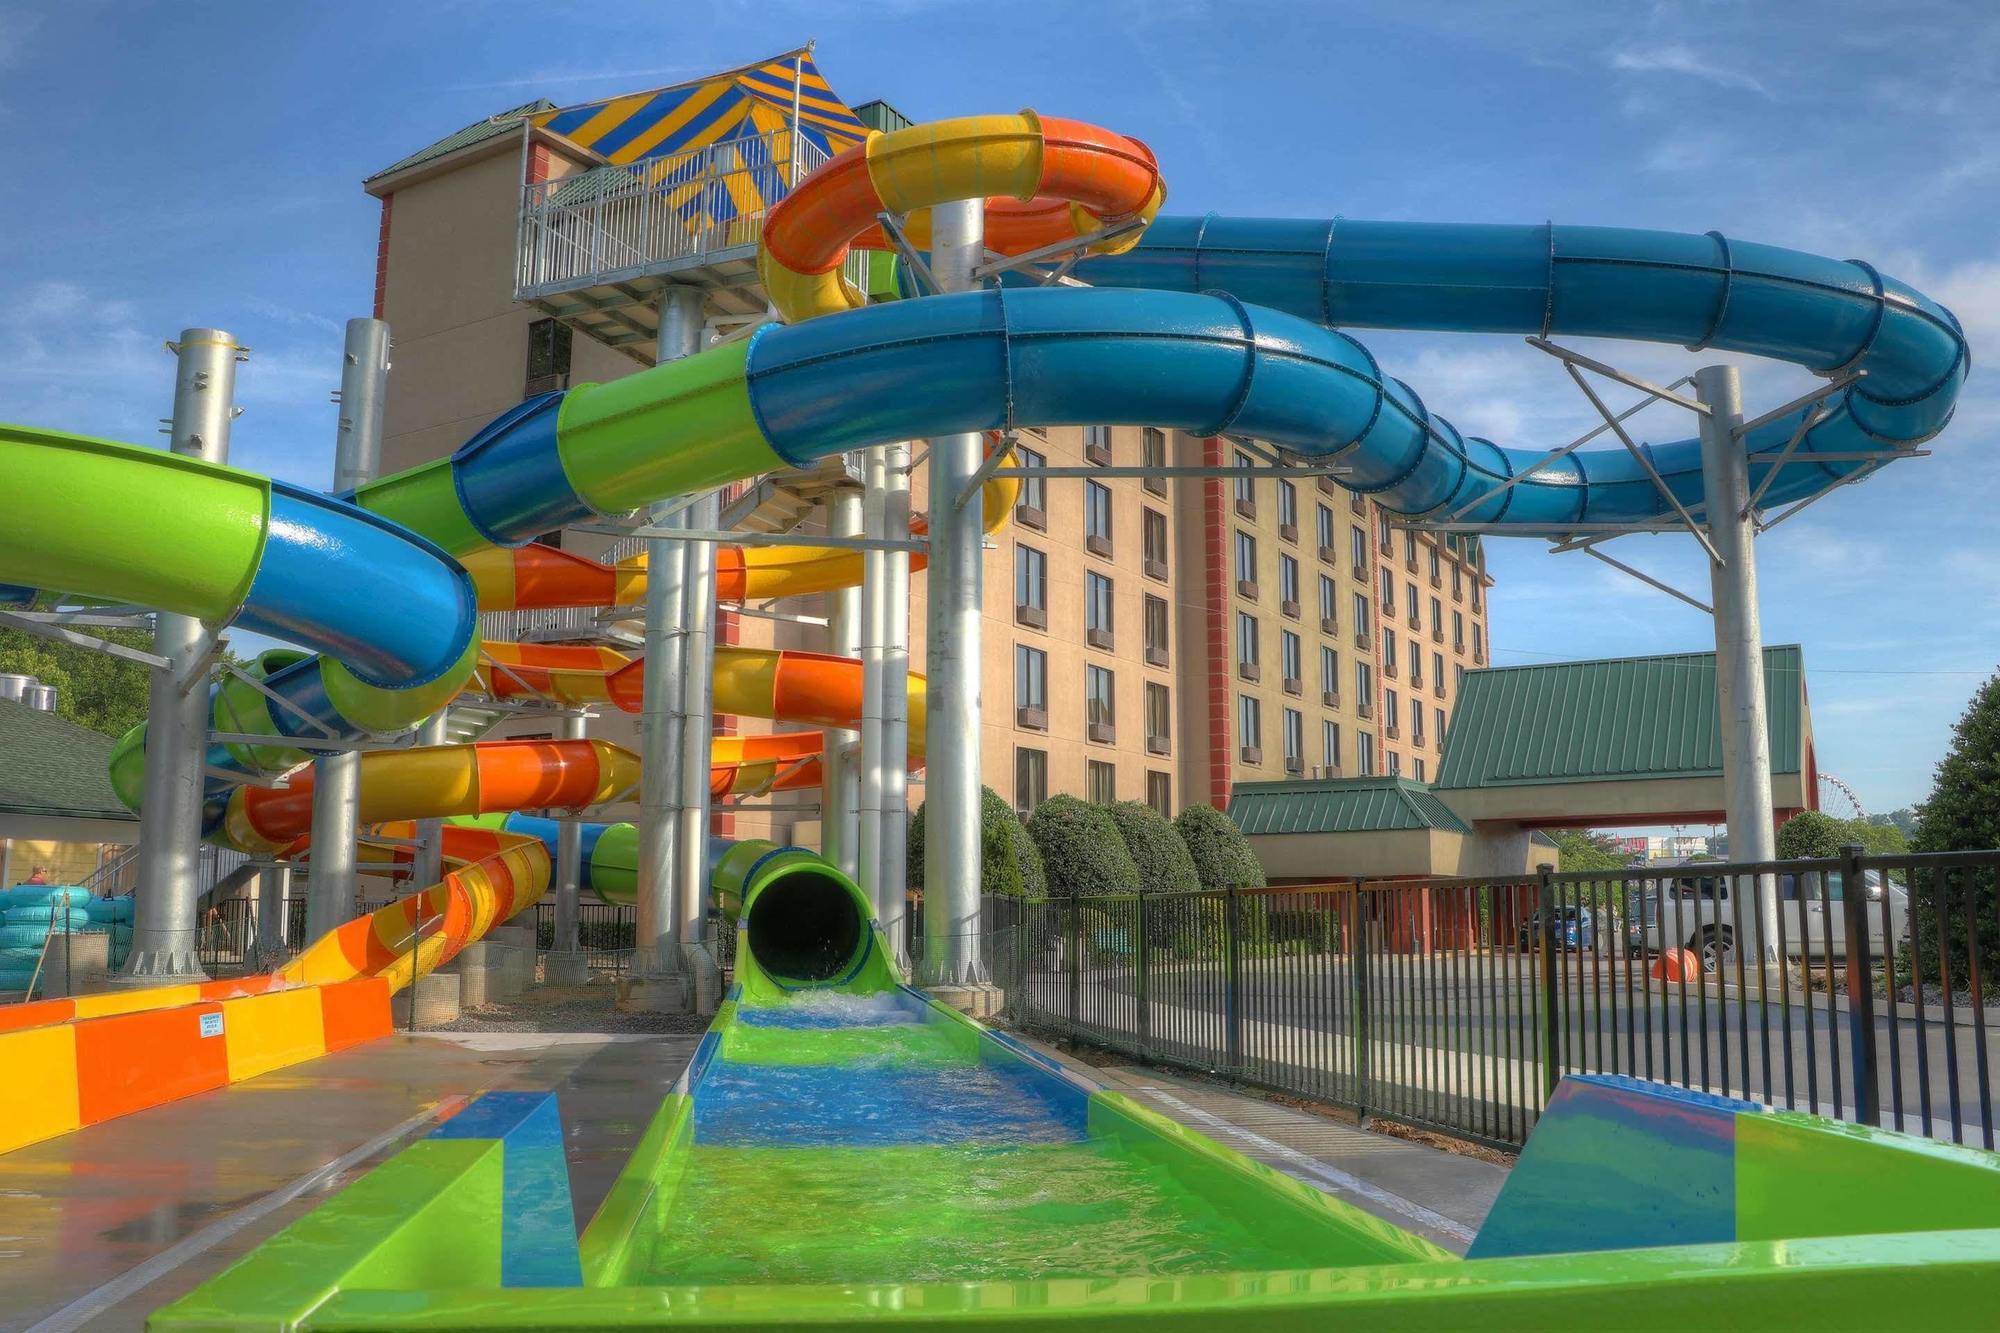 Country Cascades Waterpark Resort Pigeon Forge Exterior photo